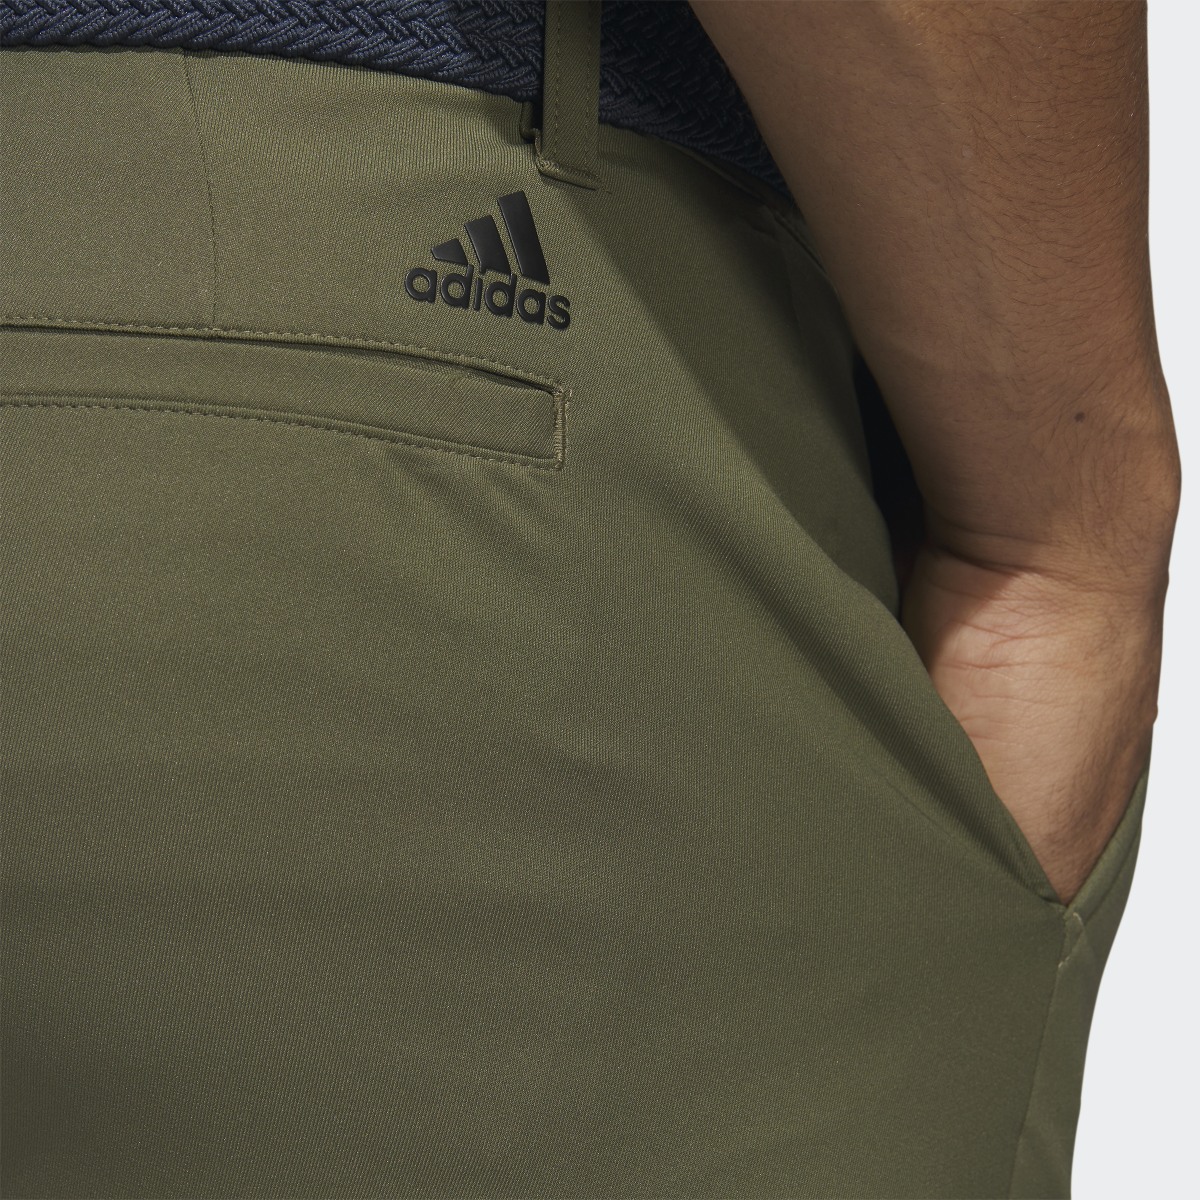 Adidas Ultimate365 Tapered Pants. 6